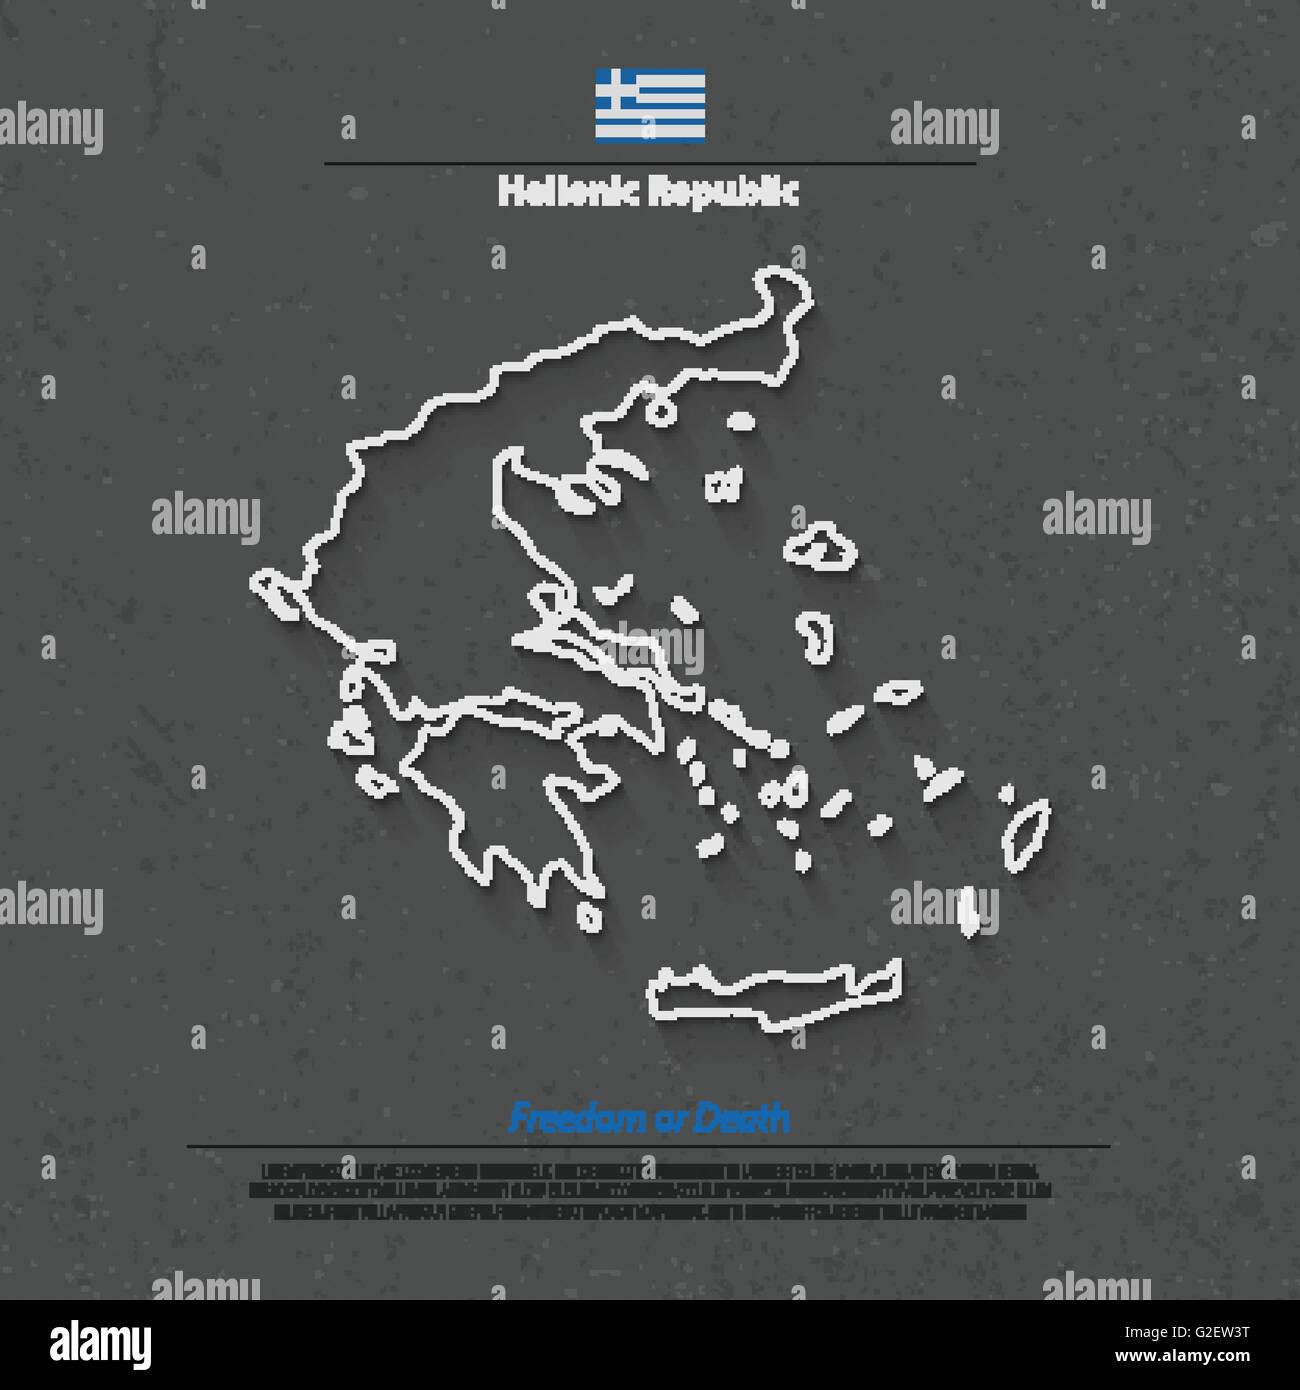 Hellenic Republic isolated map and official flag icons. vector Greece political map thin line icon. European country geographic Stock Vector